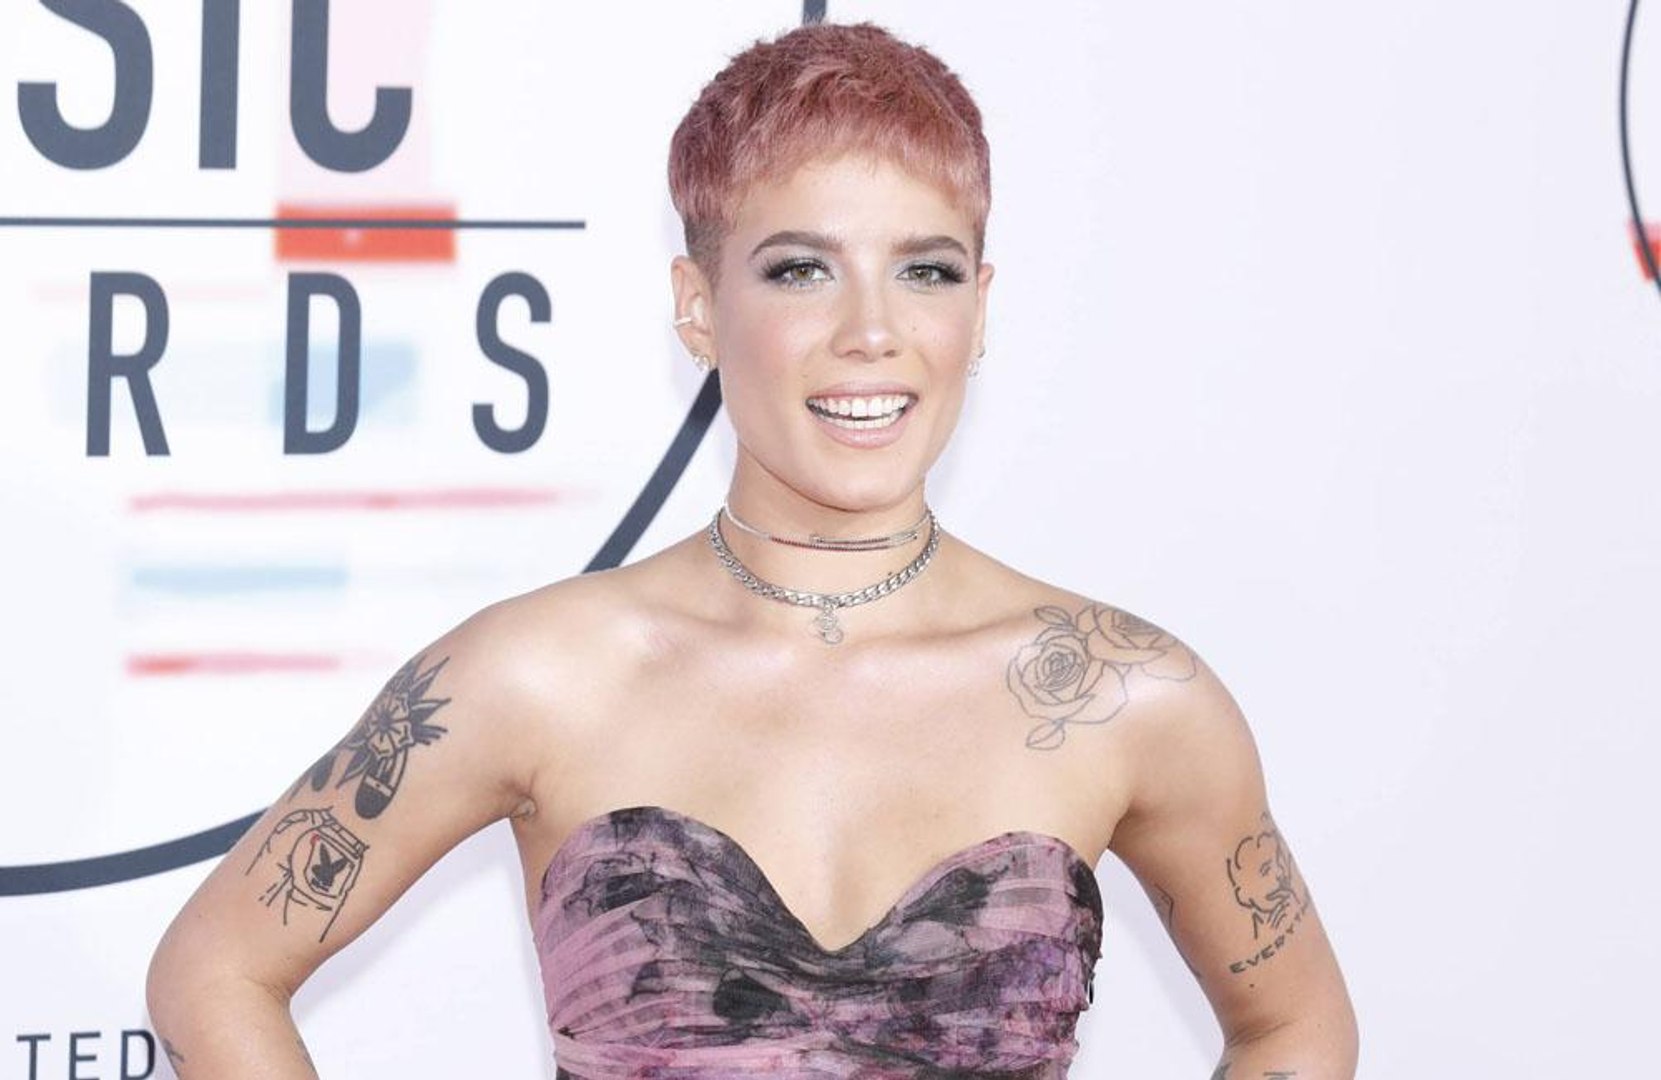 Halsey praises Yungblud for making her 'soul gleam'